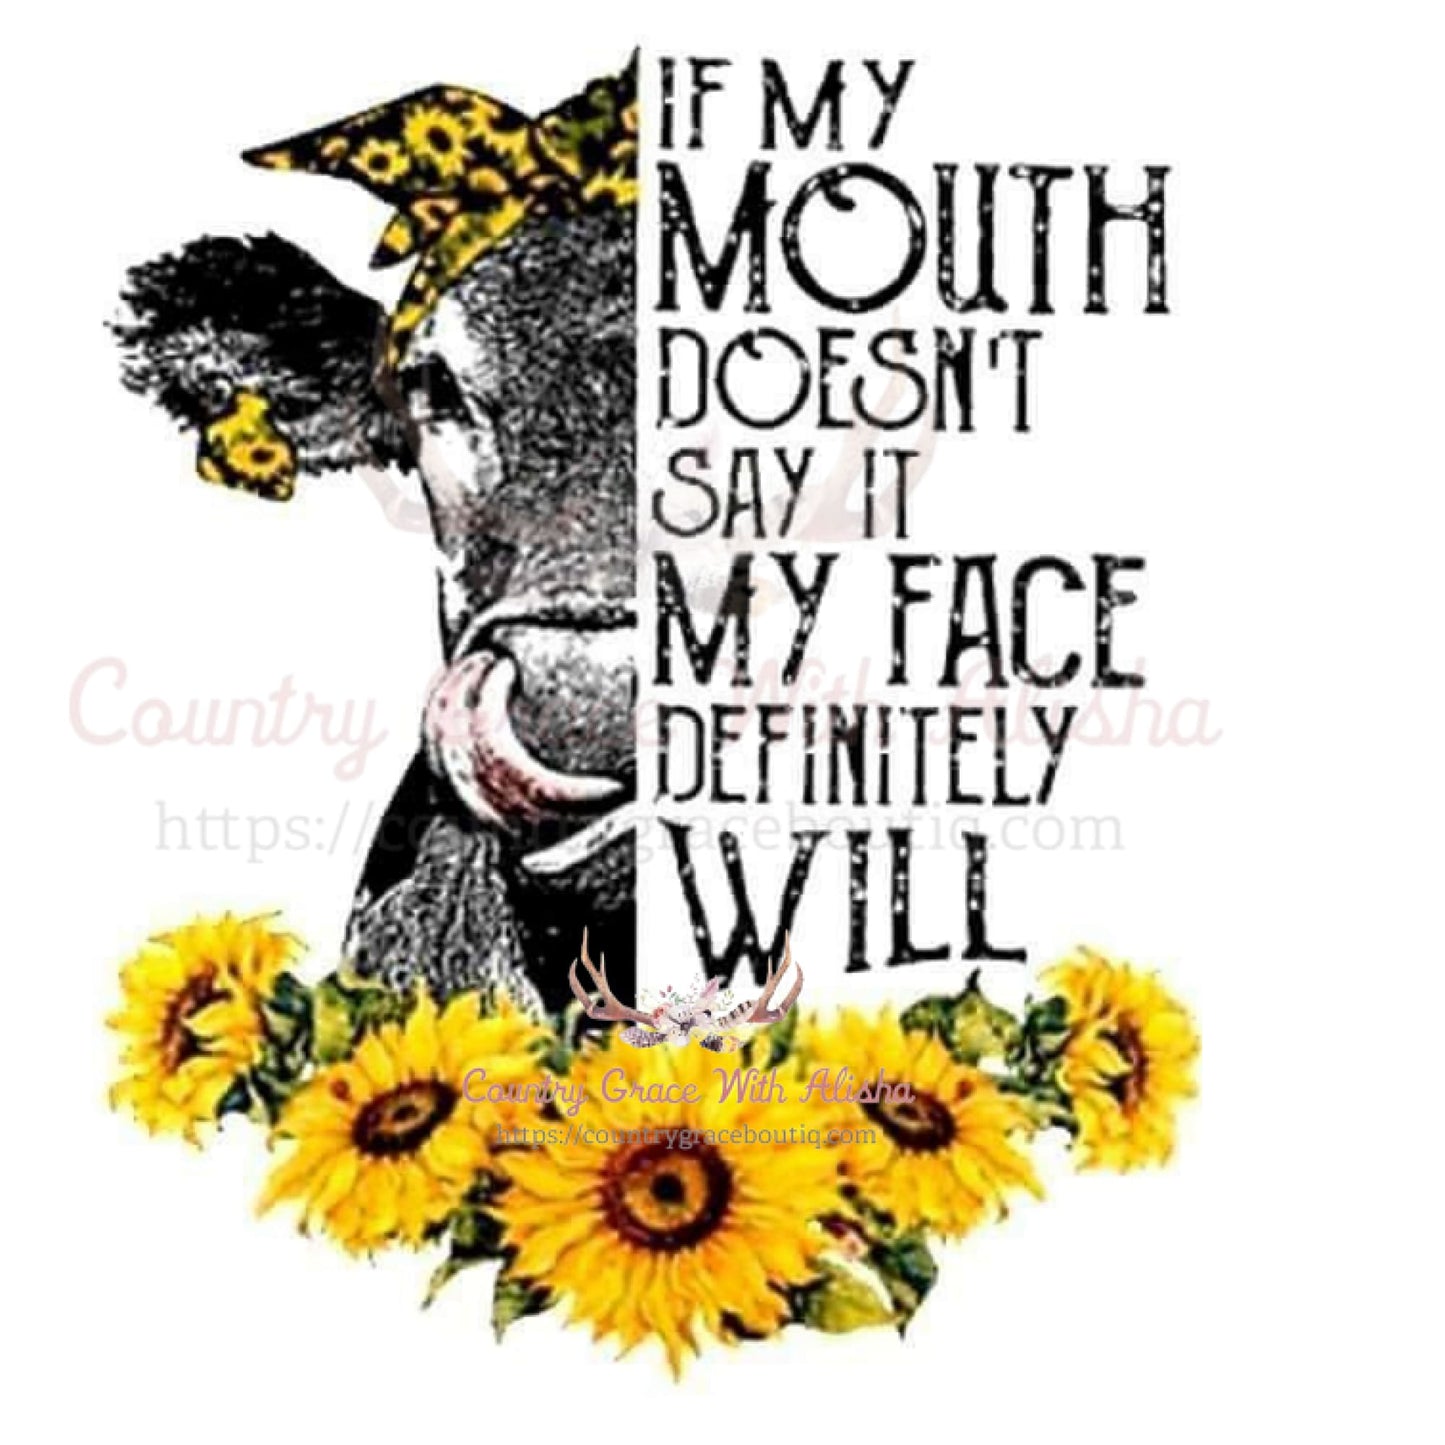 If My Mouth Cow Sunflower Sublimation Transfer - Sub $1.50 